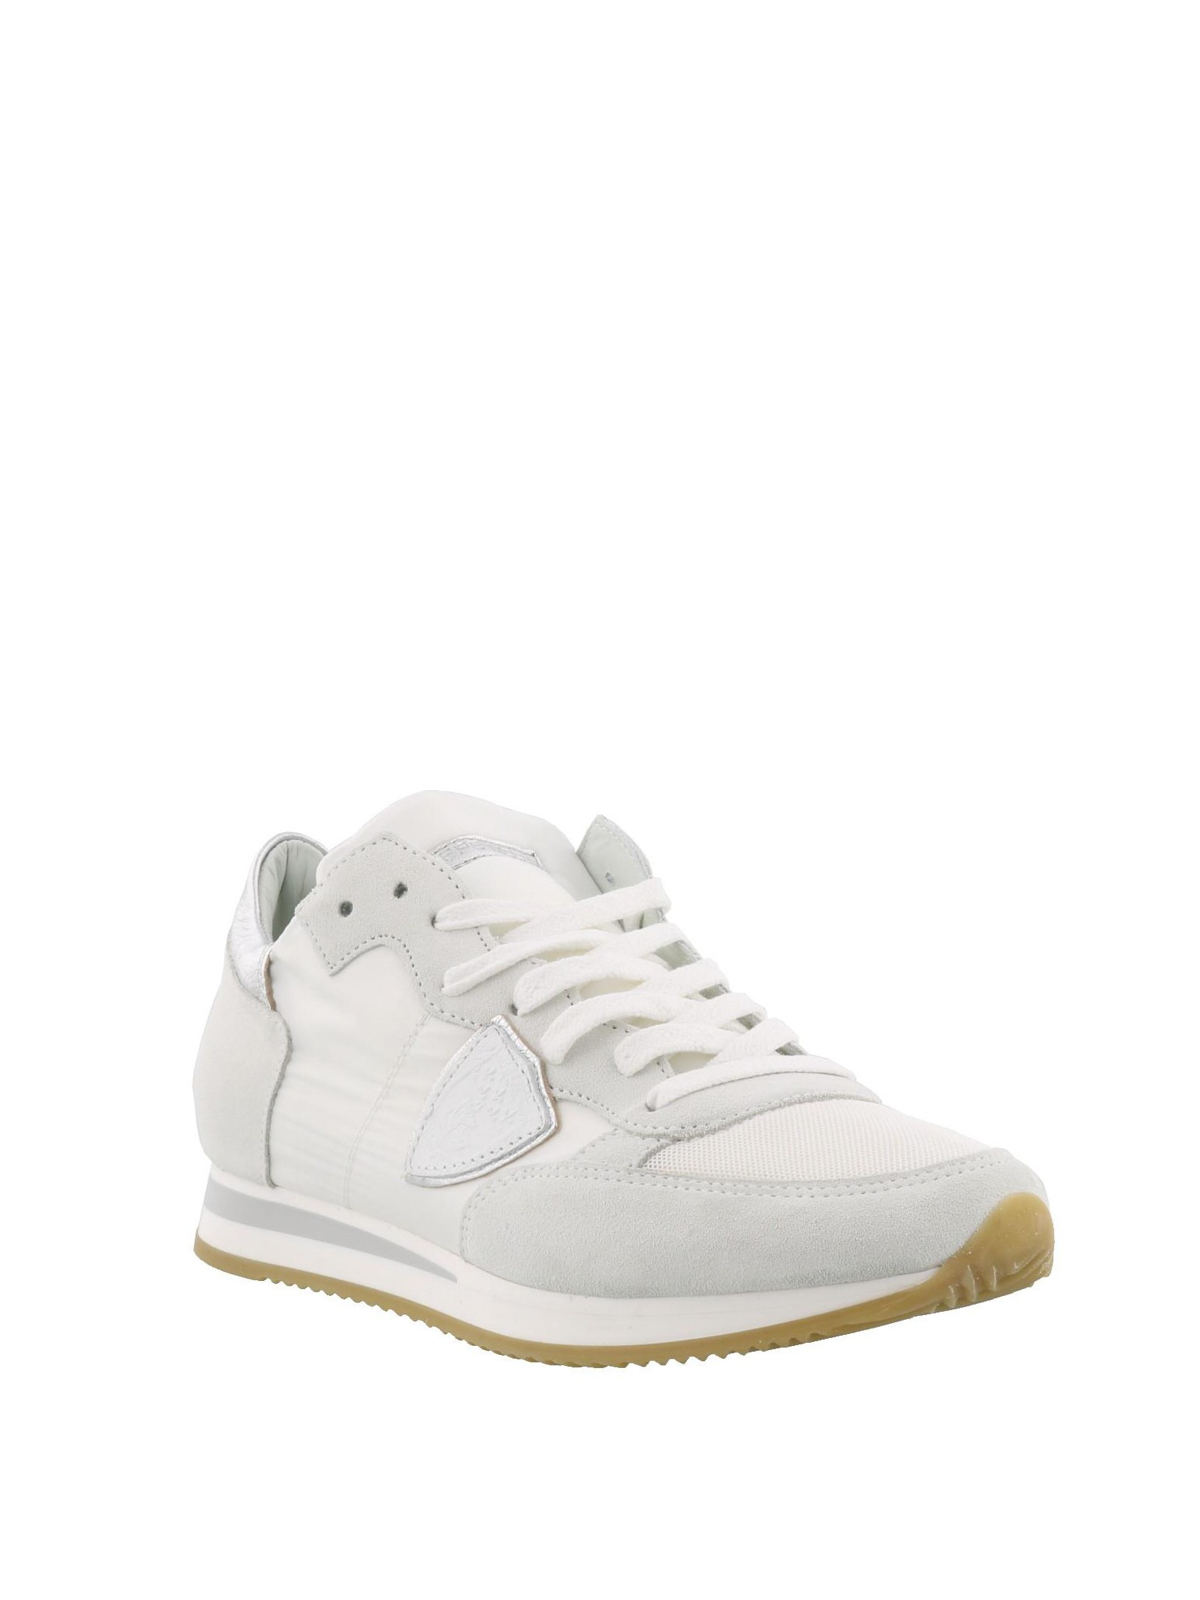 Philippe Model - Tropez white sneakers with silver logo - trainers -  TRLD1120